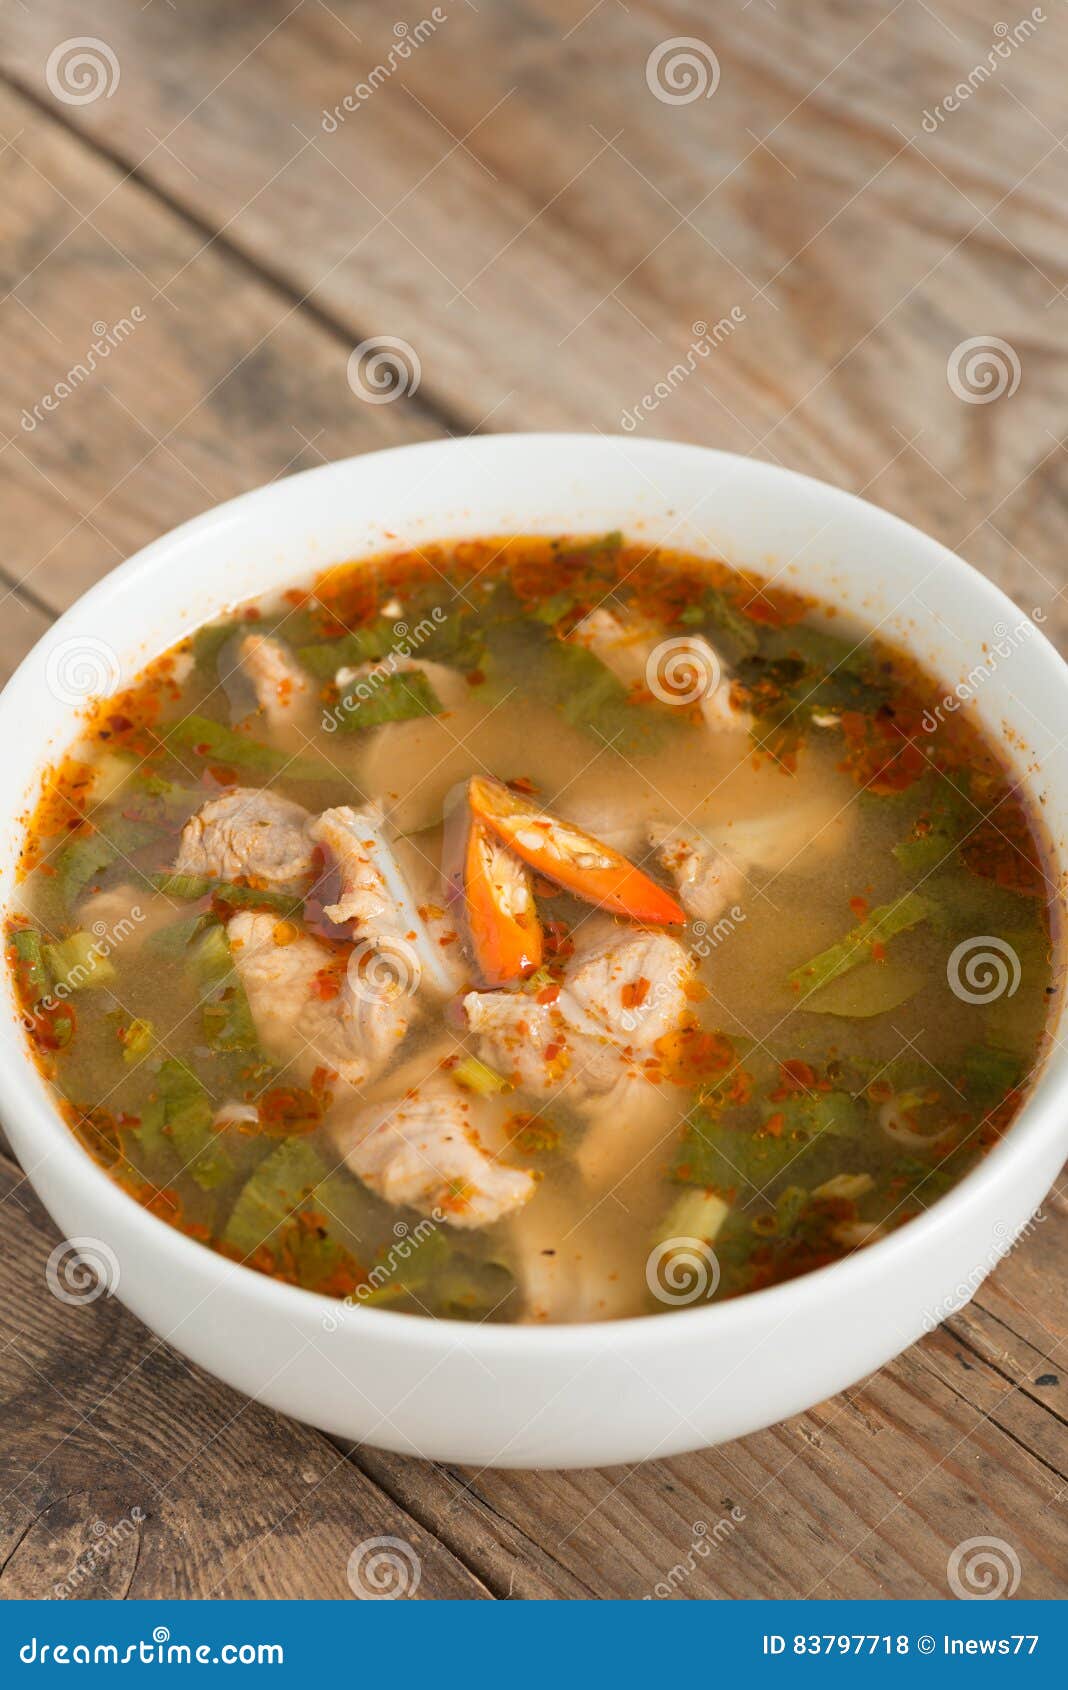 Hot and Spicy Soup Pork Cartilage with Thai Herb. Stock Photo - Image ...